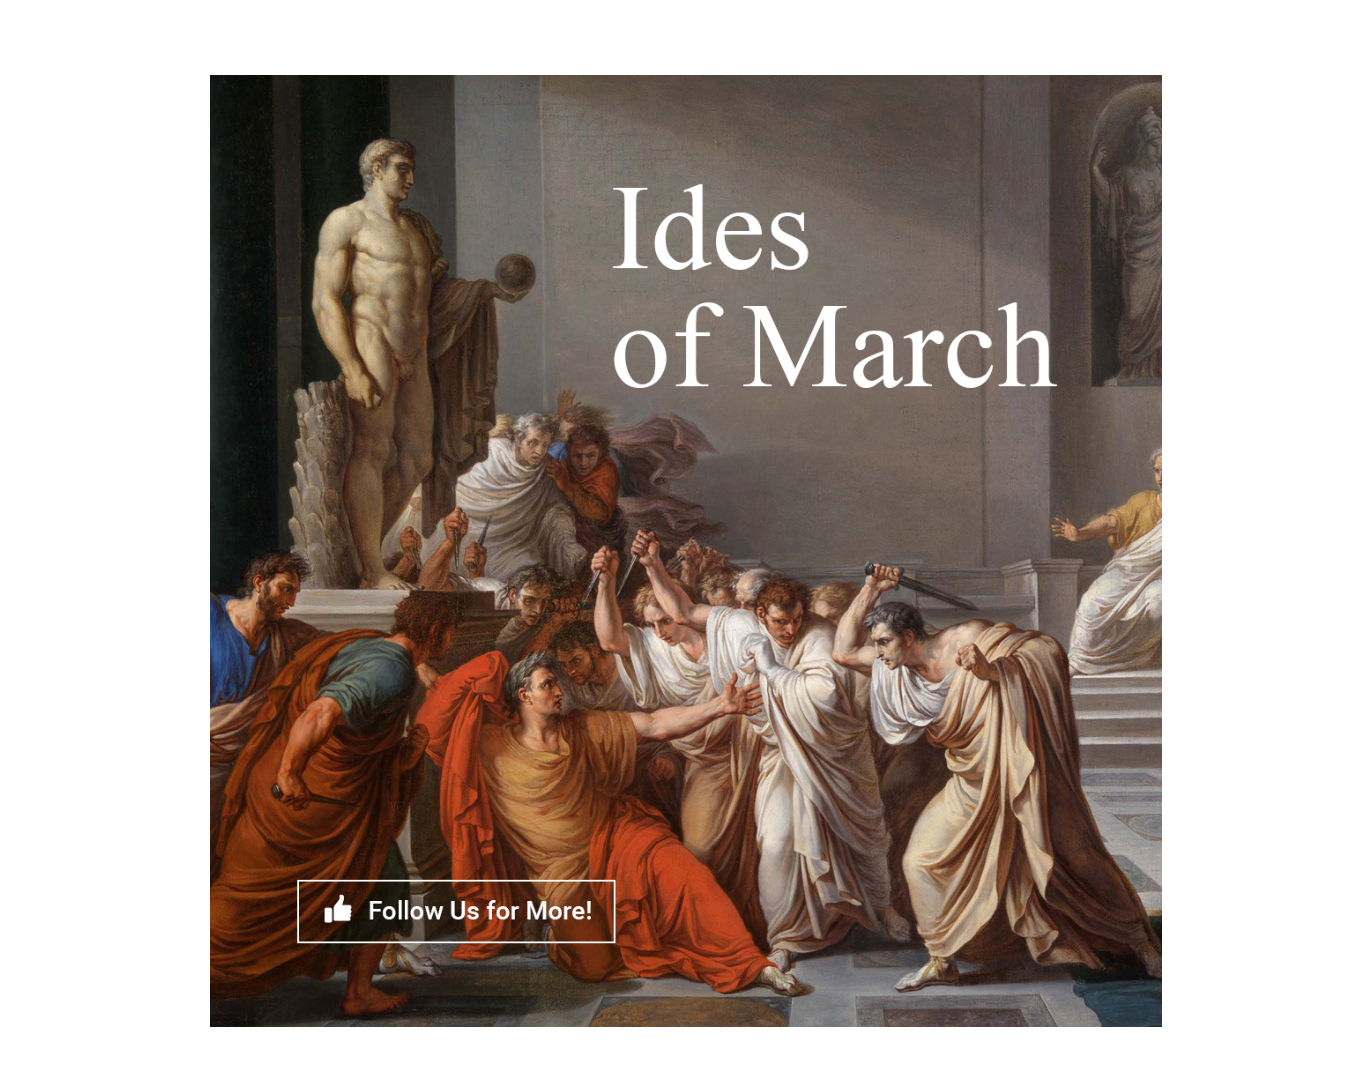 The Ides of March the first day of the Roman New Year West Orlando